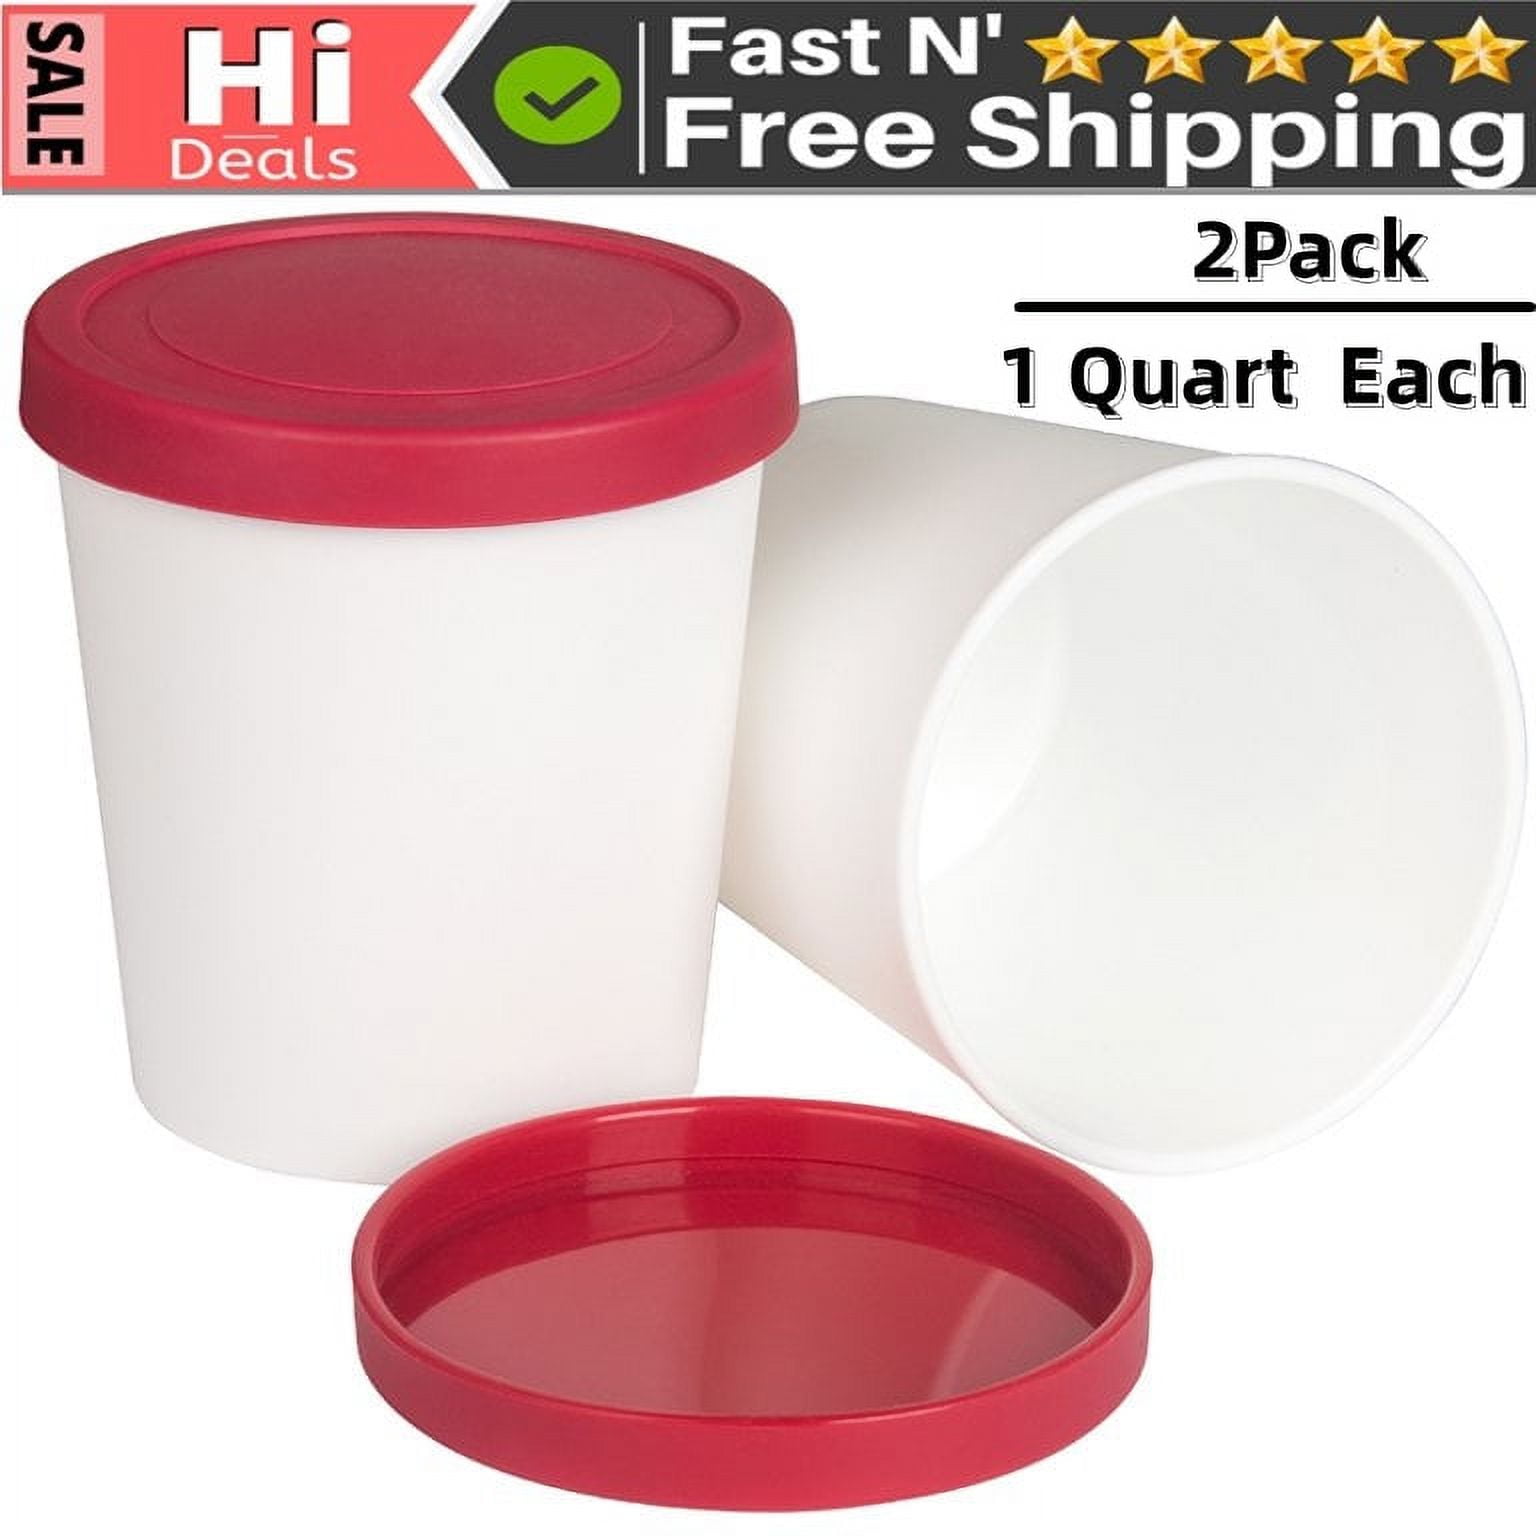 Premium Ice Cream Containers (2 Pack - 1.5 Quart Each) Reusable Freezer  Storage Tubs with Lids for Ice Cream, Sorbet and Gelato! 